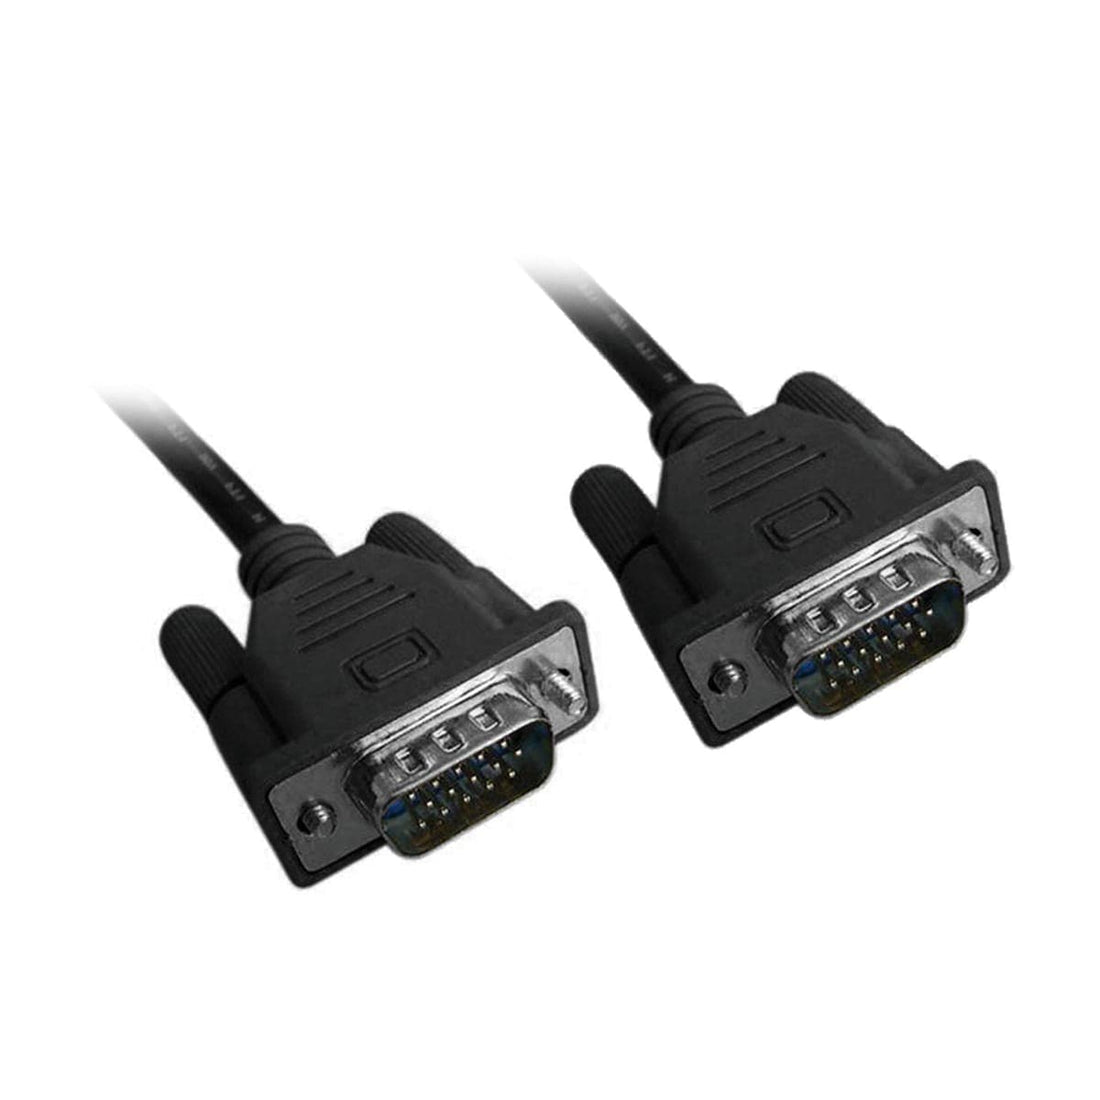 EVOLOGY VGA MONITOR CABLE MALE/MALE 2 M - best price from Maltashopper.com BR420230953